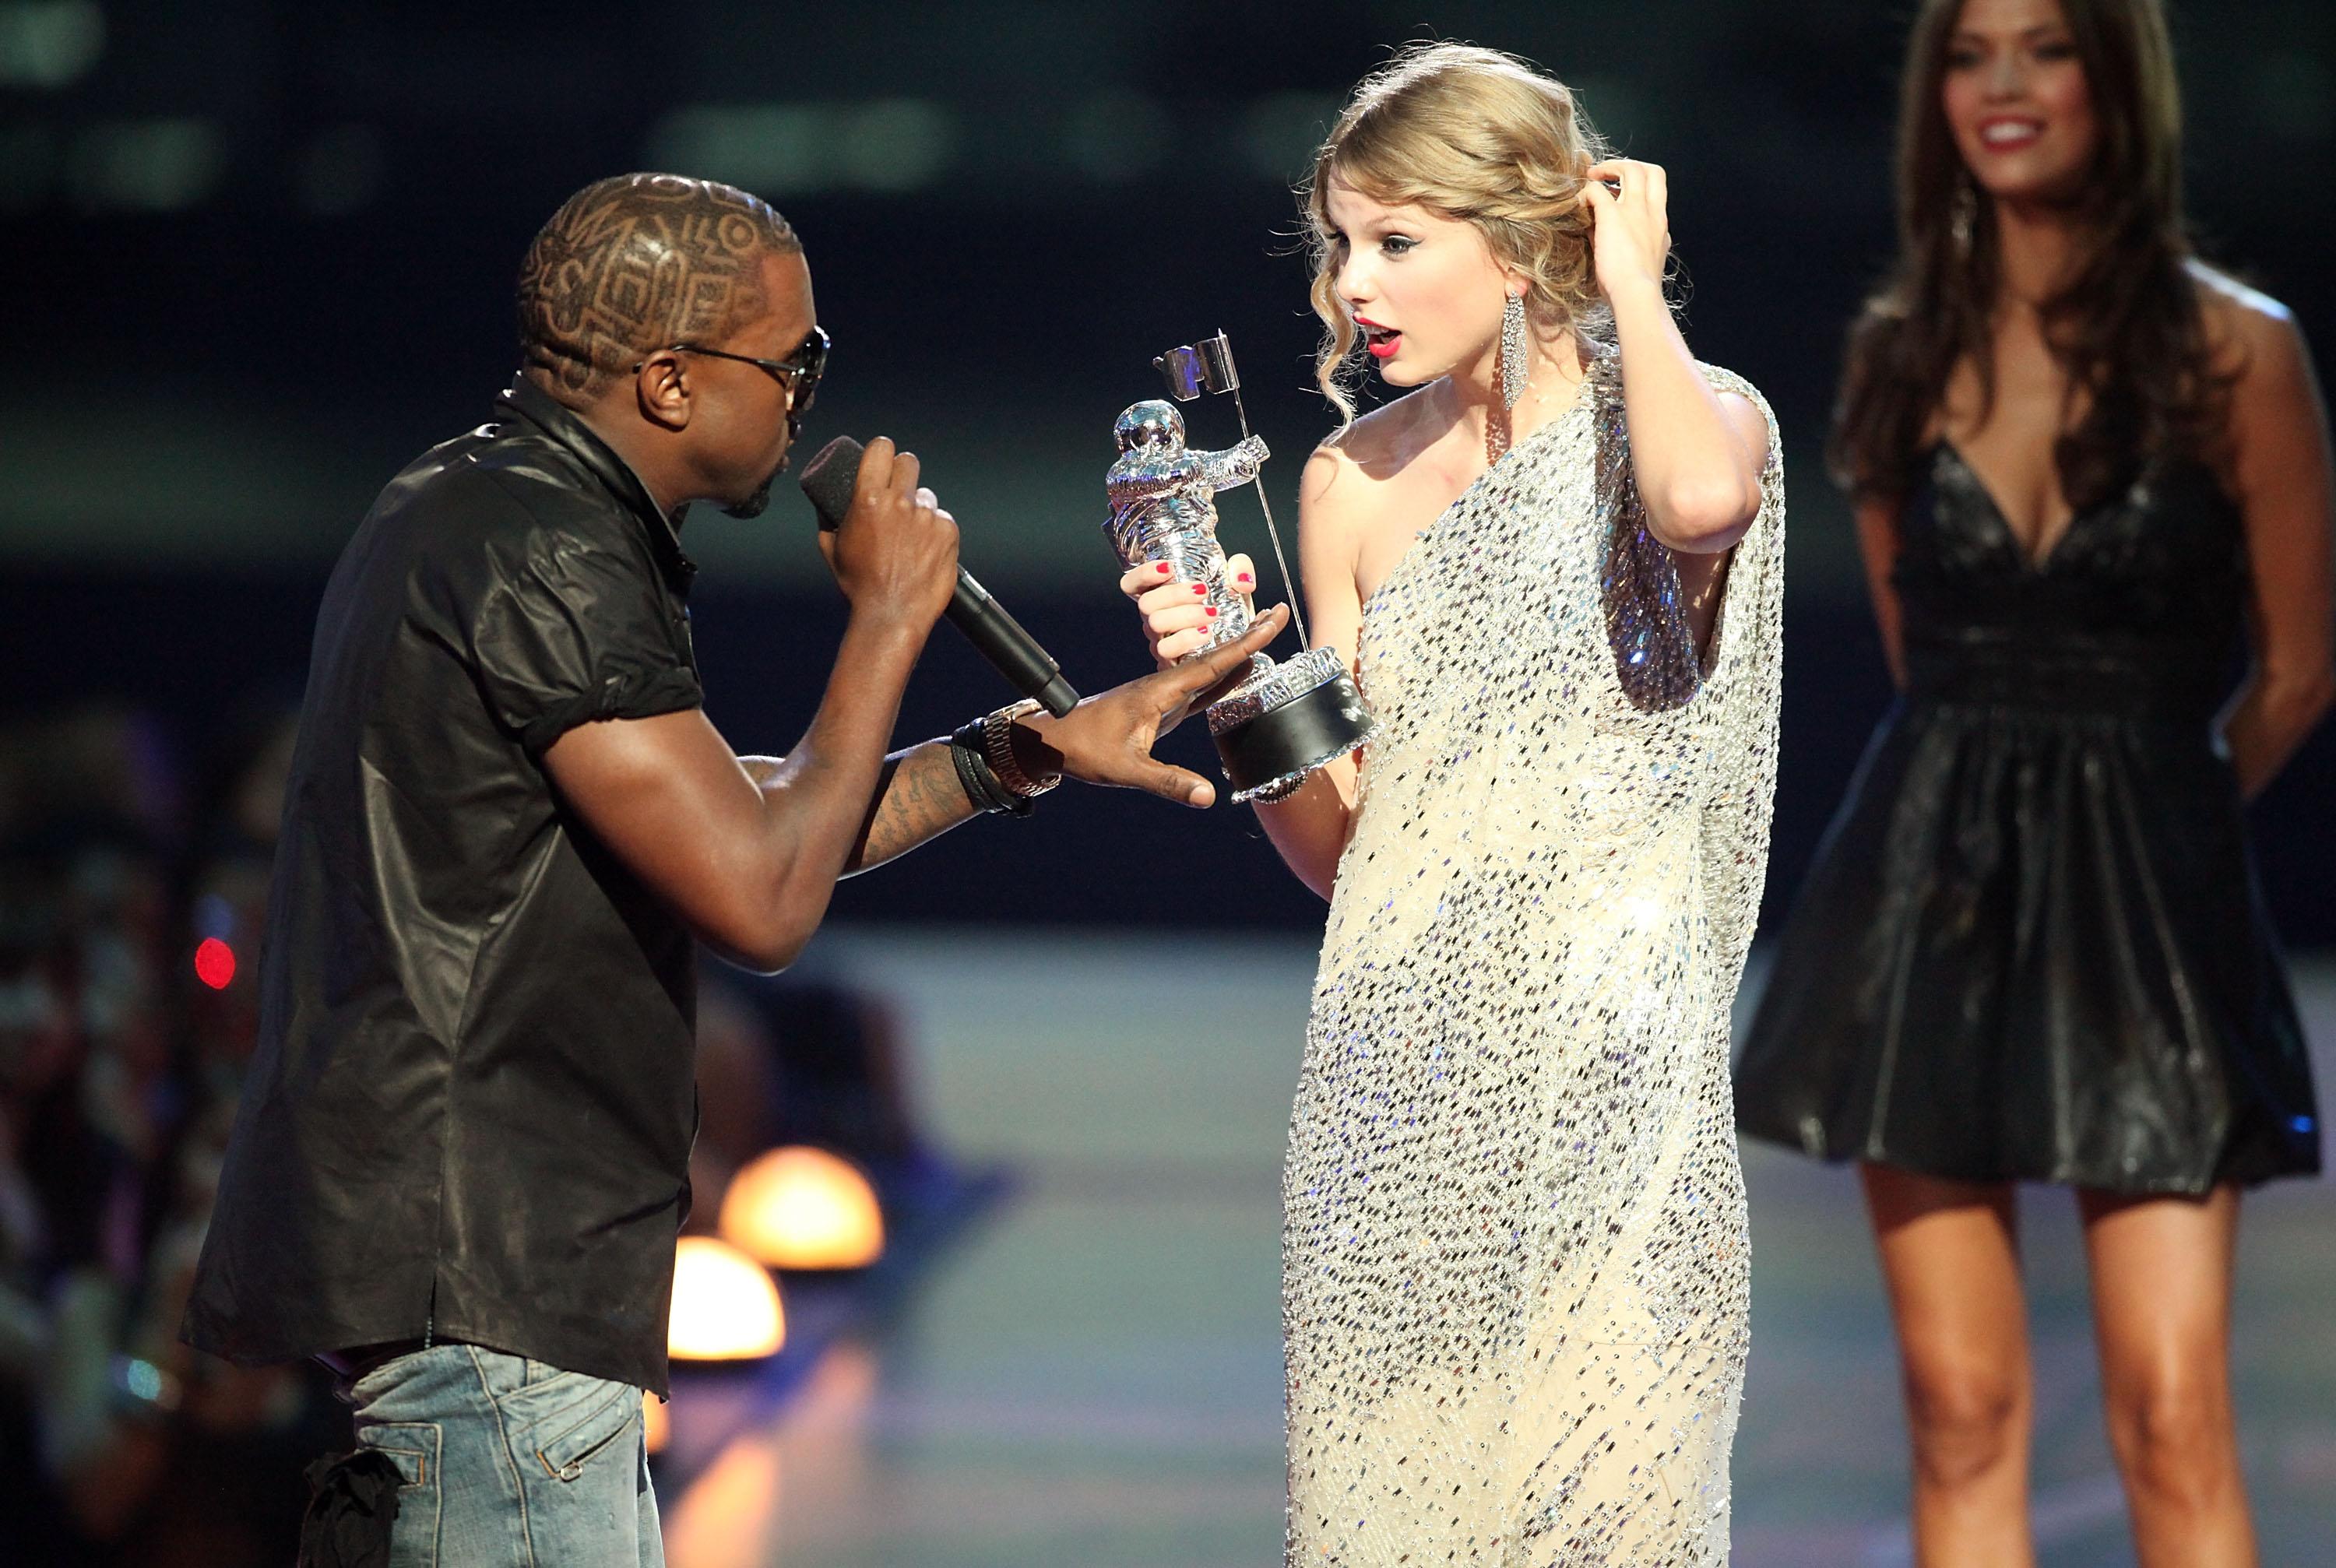 Kanye West and Taylor Swift Have a Long-Standing Feud: Here’s How It Started